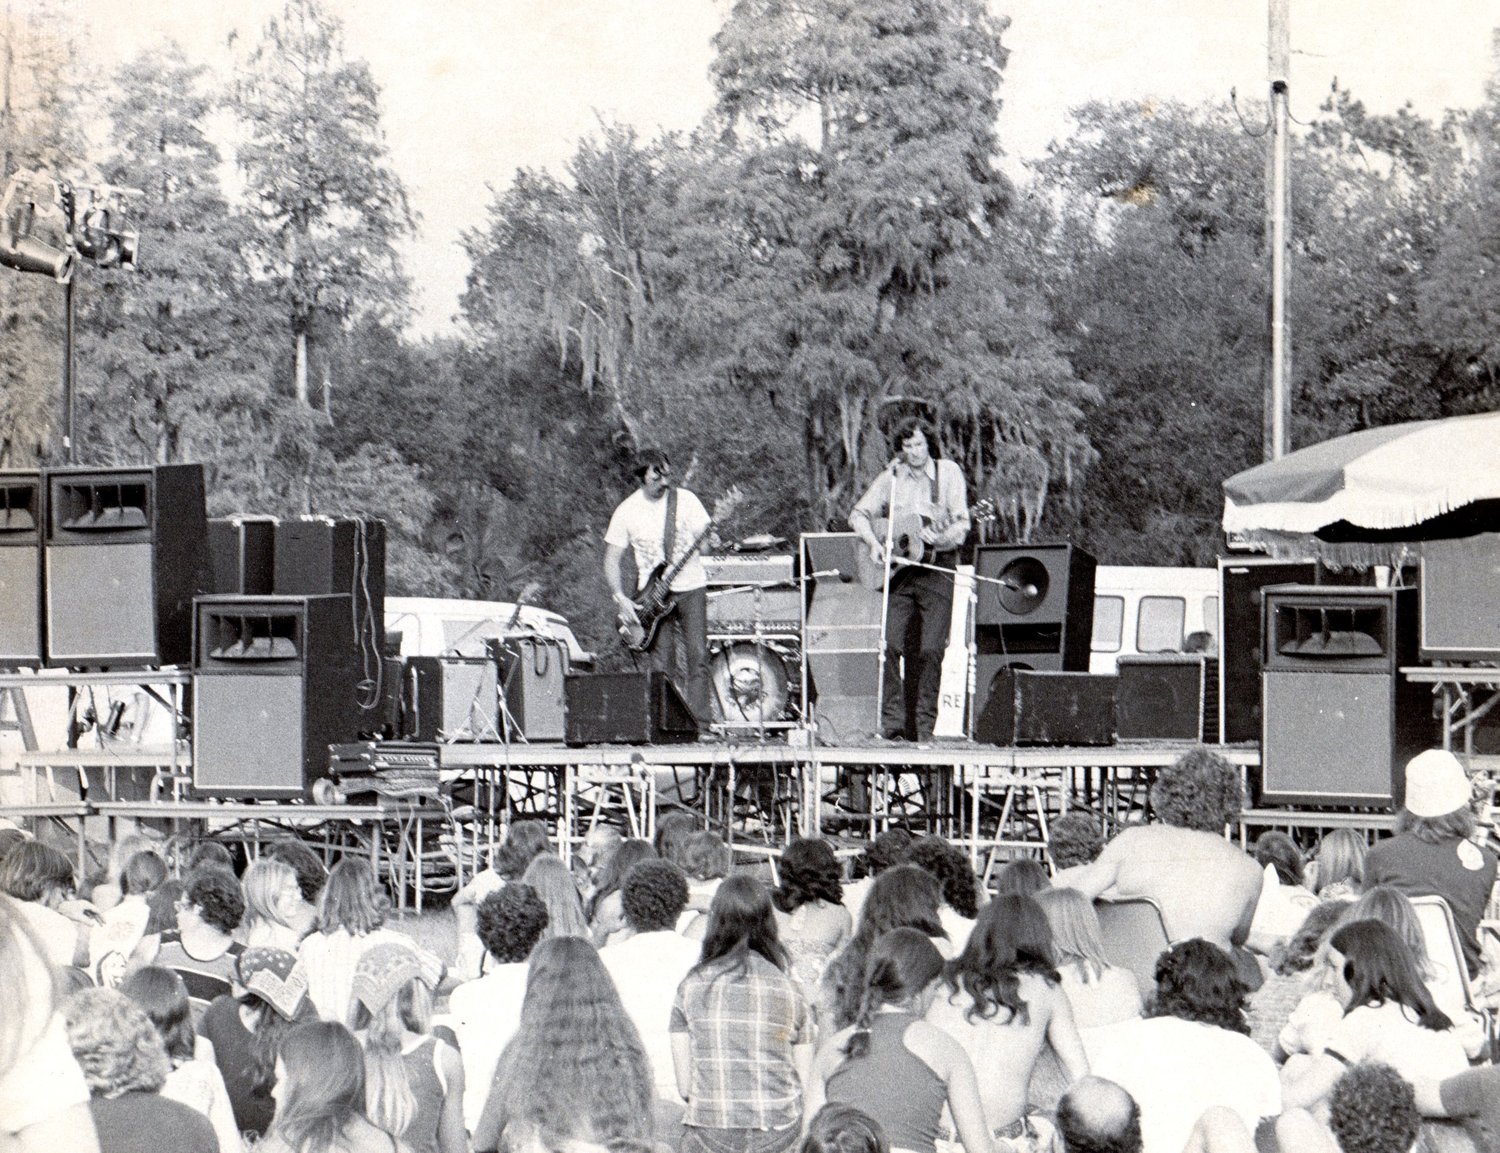 The late Gamble Rogers performs on an outdoor stage.